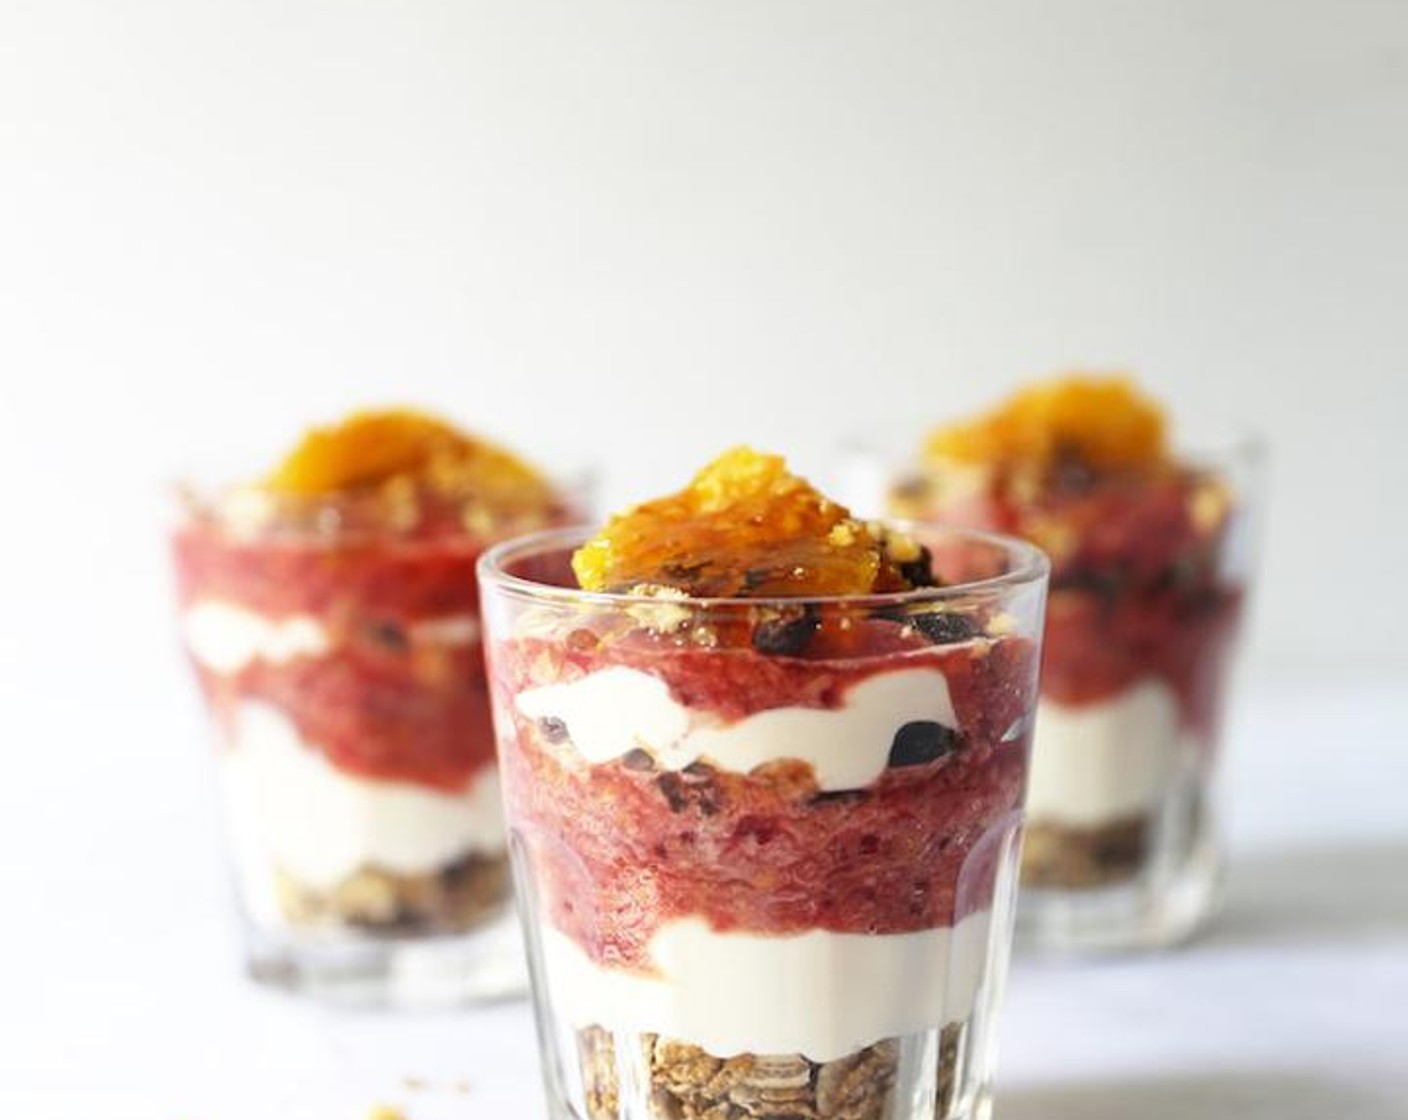 step 3 Top with extra granola, Unsweetened Coconut Flakes (to taste), orange segments and drizzle with Honey (to taste). Serve immediately. Enjoy!